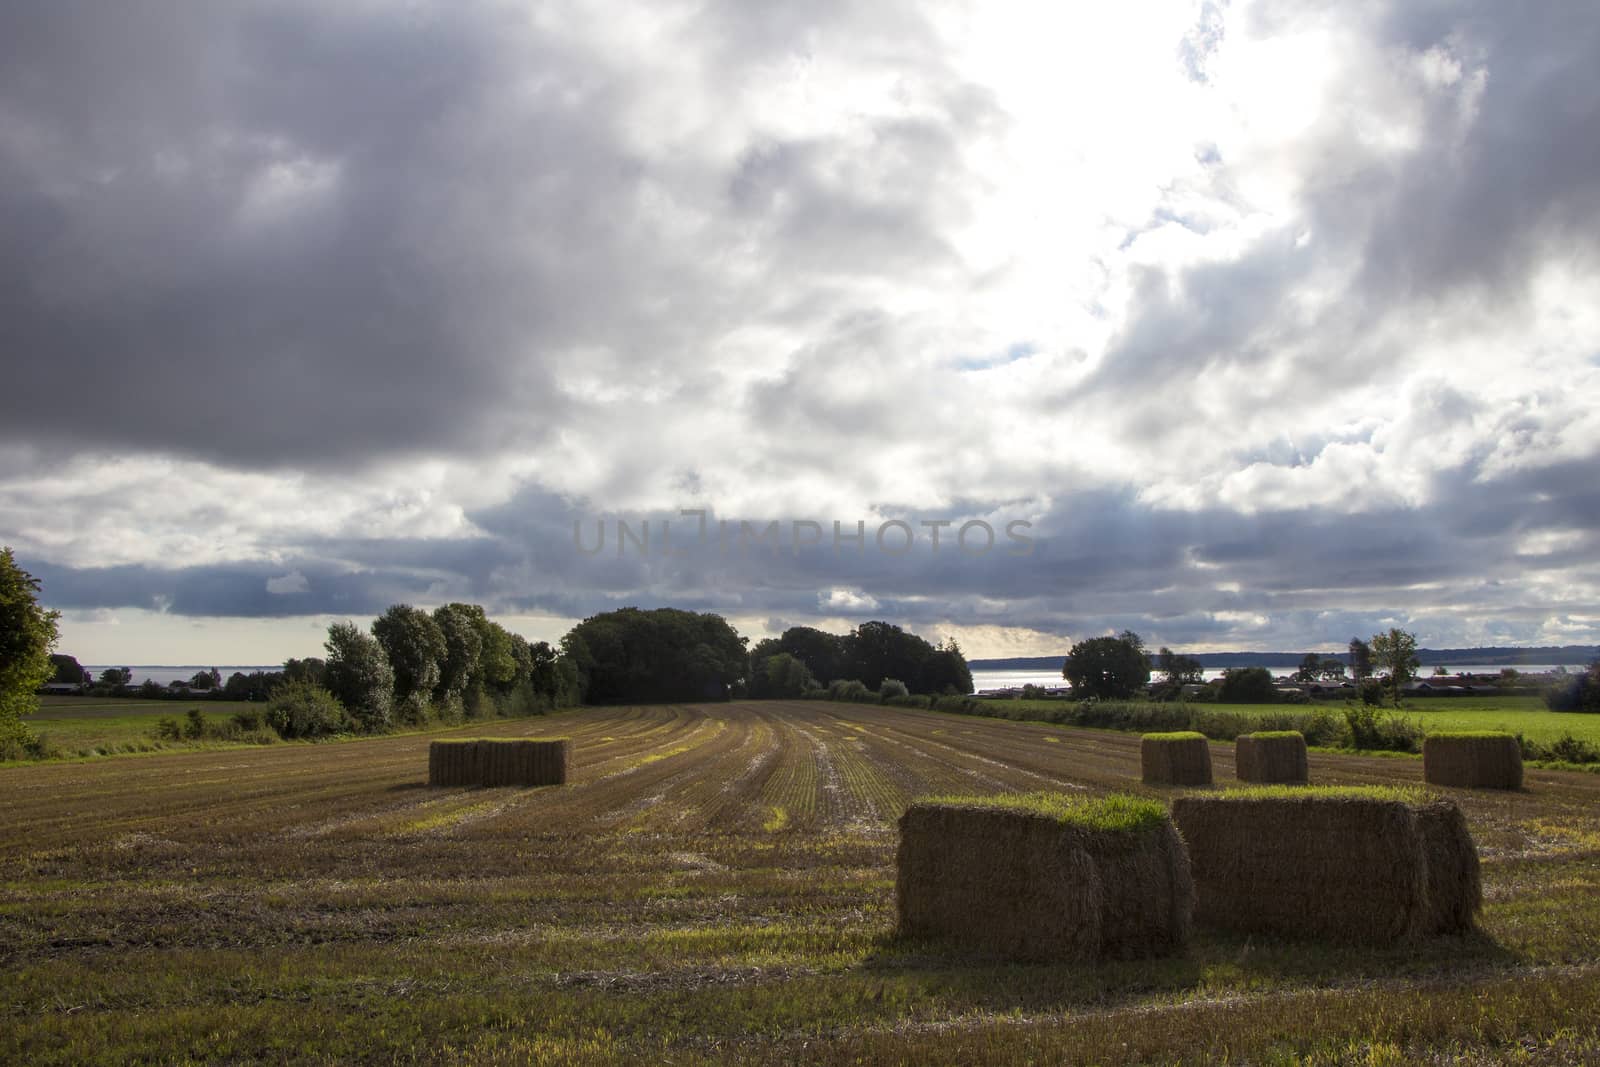 Large field with haystacks under a cloudy sky on a cloudy day.